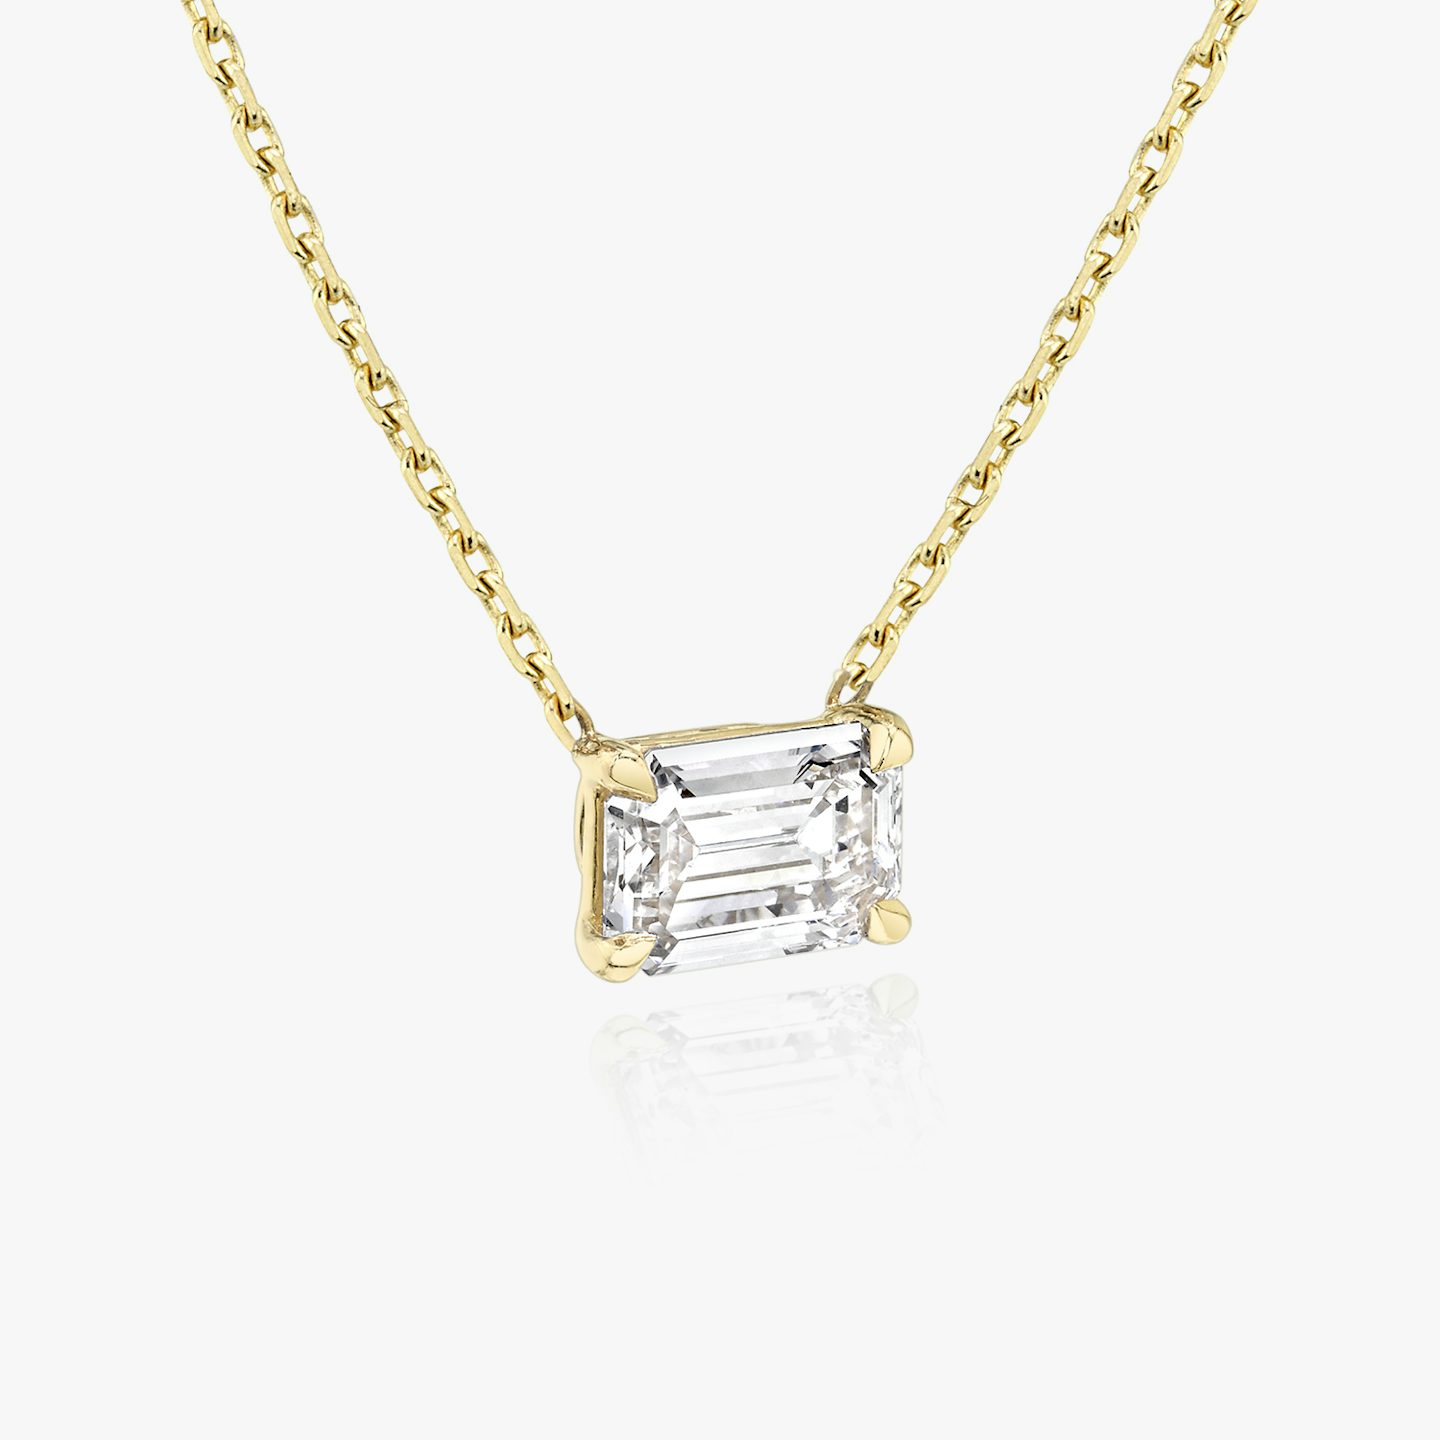 VRAI Solitaire Necklace | Emerald | 14k | 18k Yellow Gold | Carat weight: See full inventory